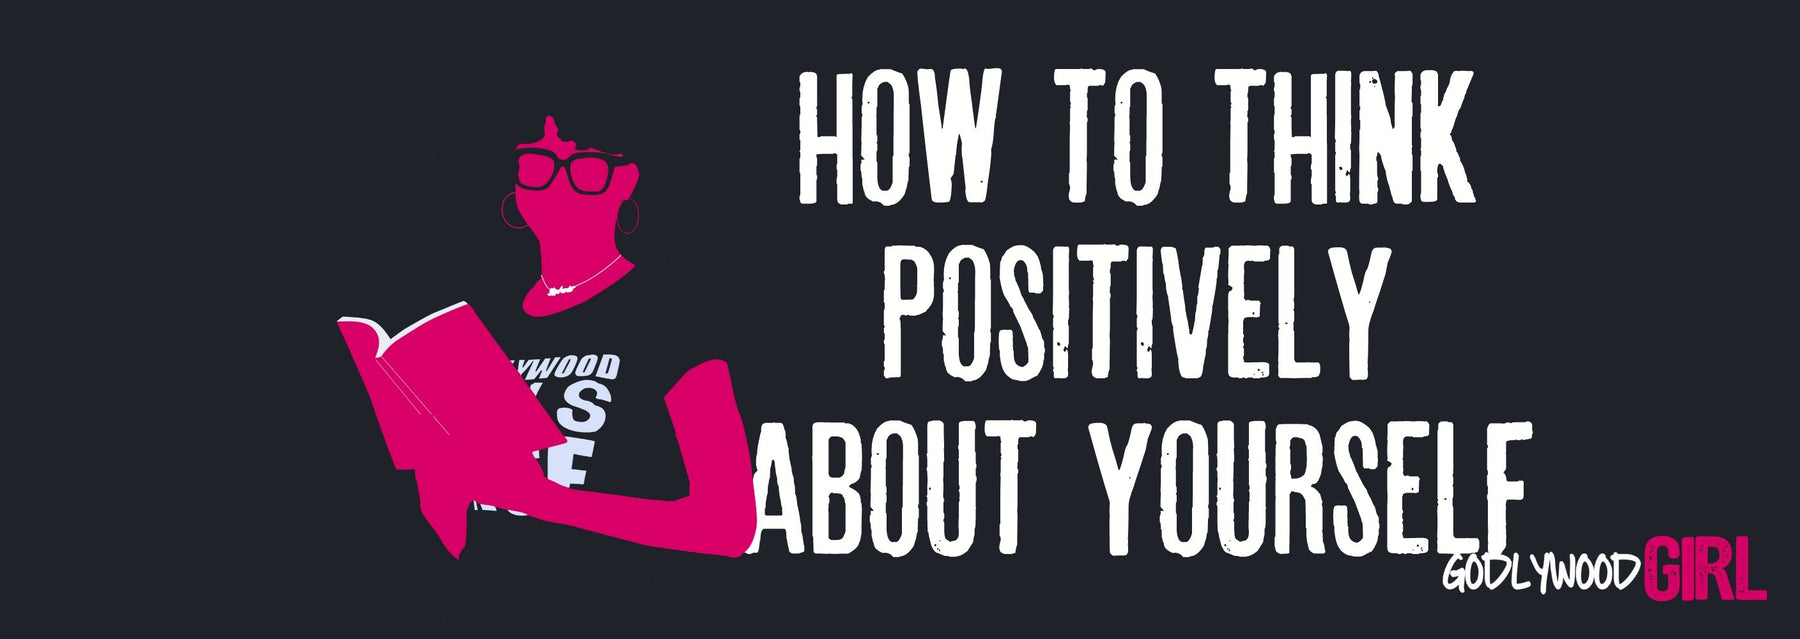 HOW TO THINK POSITIVELY ABOUT YOURSELF (How To Reprogram Your Mind for Positive Thinking) || HOW TO